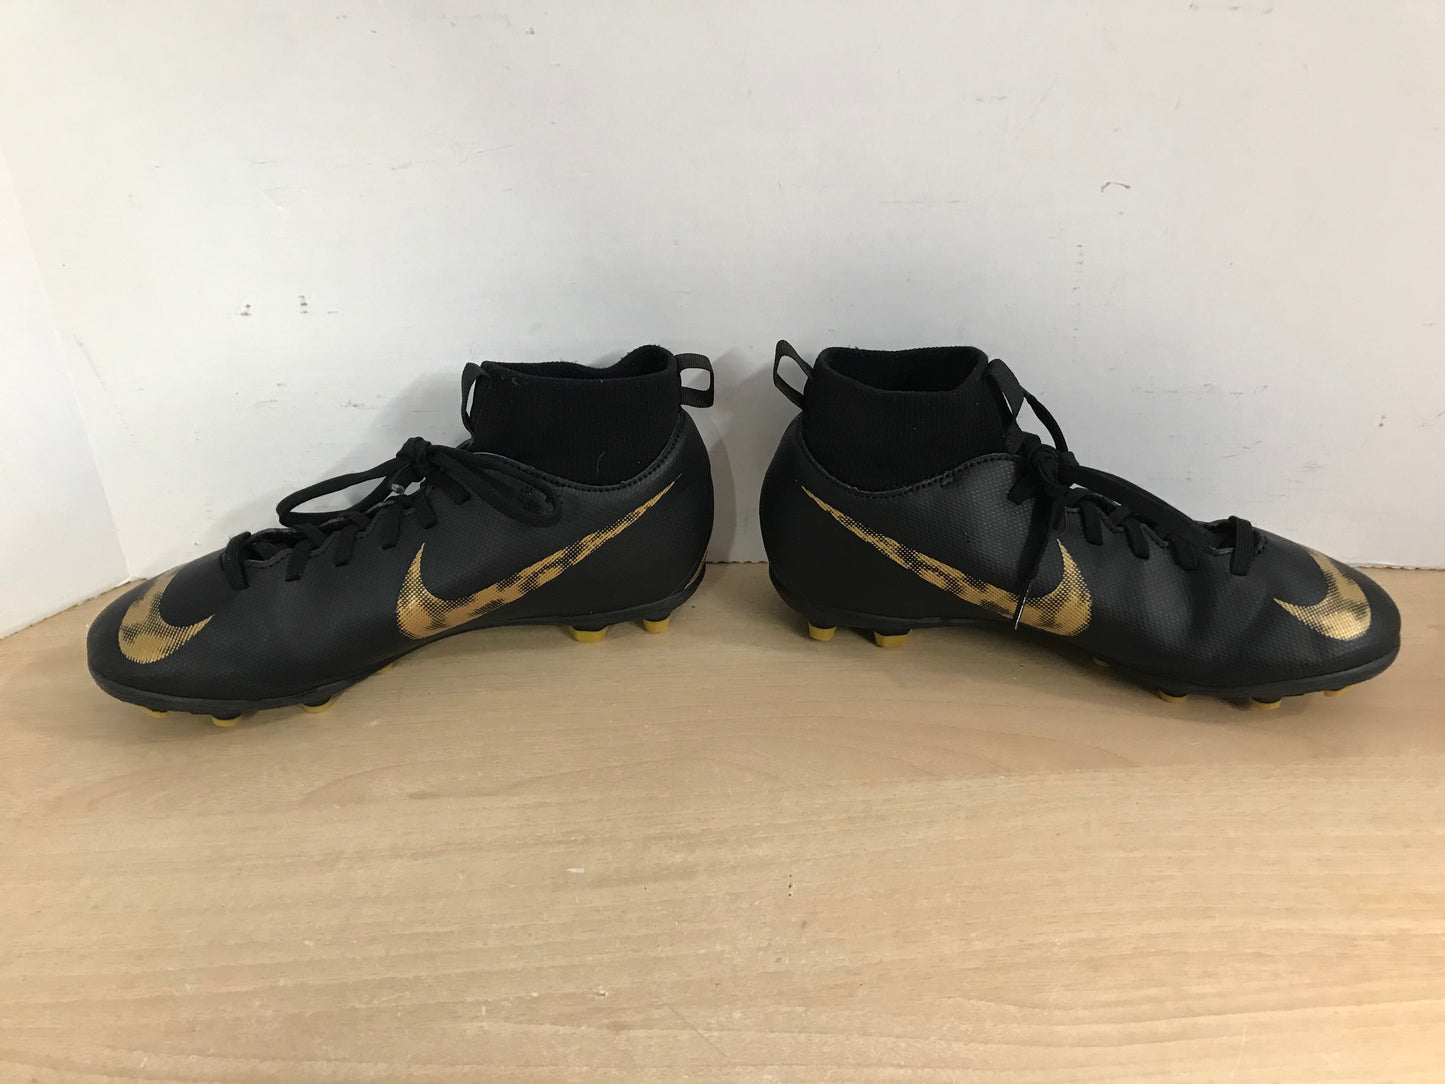 Soccer Shoes Cleats Child Size 5.5 Nike Mercurial  Black Bronze Slipper Foot Excellent